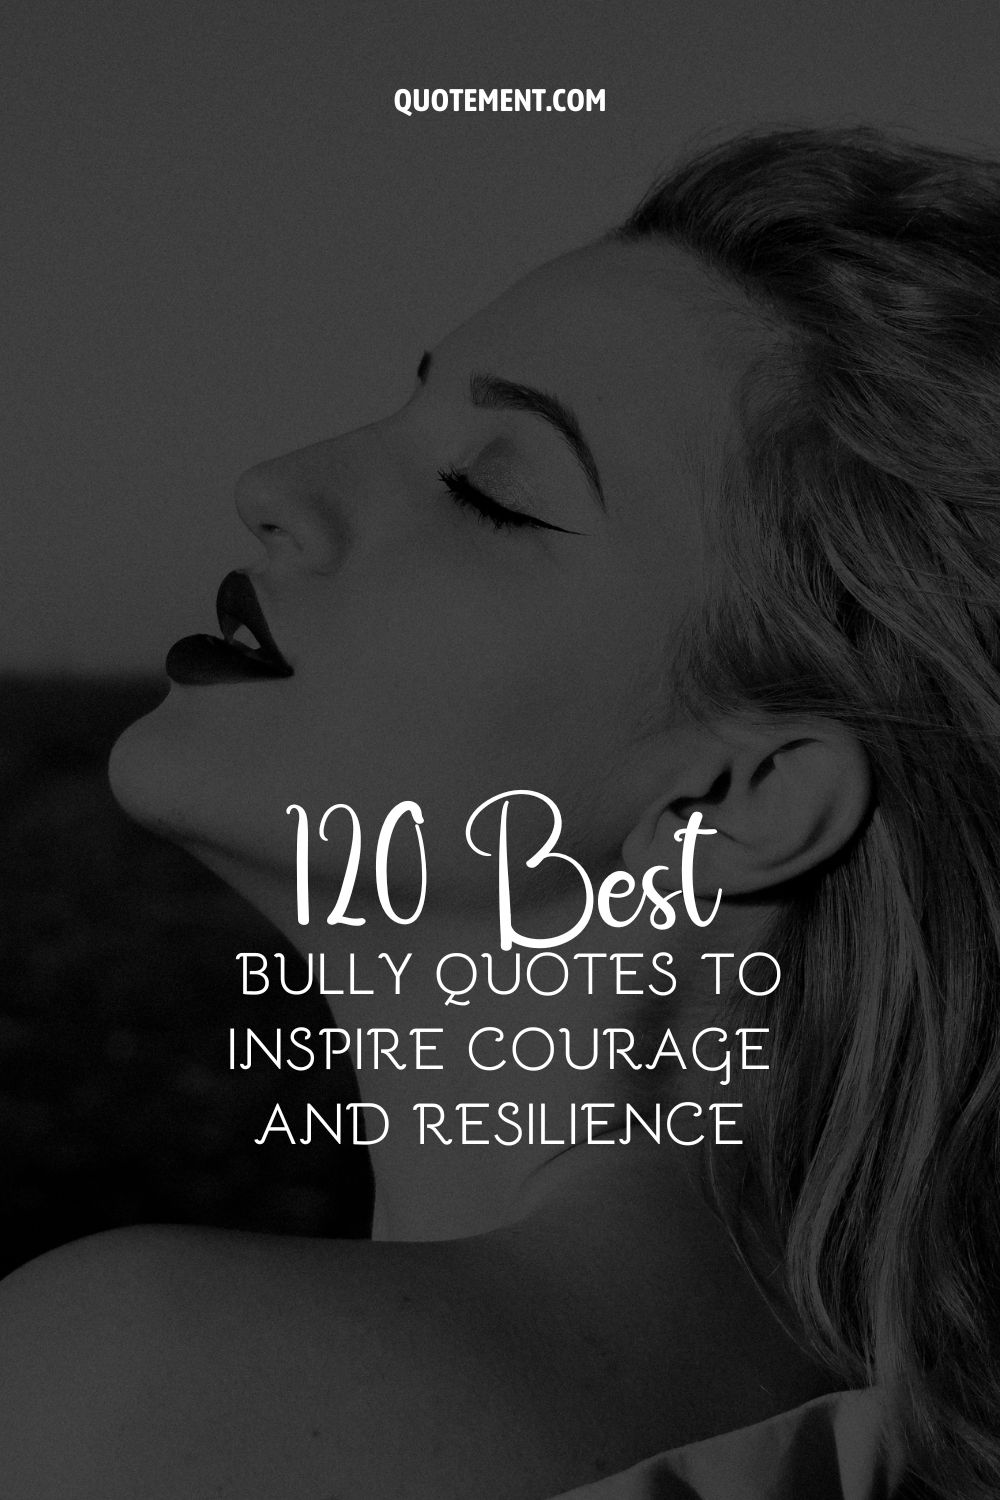 120 Best Bully Quotes To Inspire Courage And Resilience